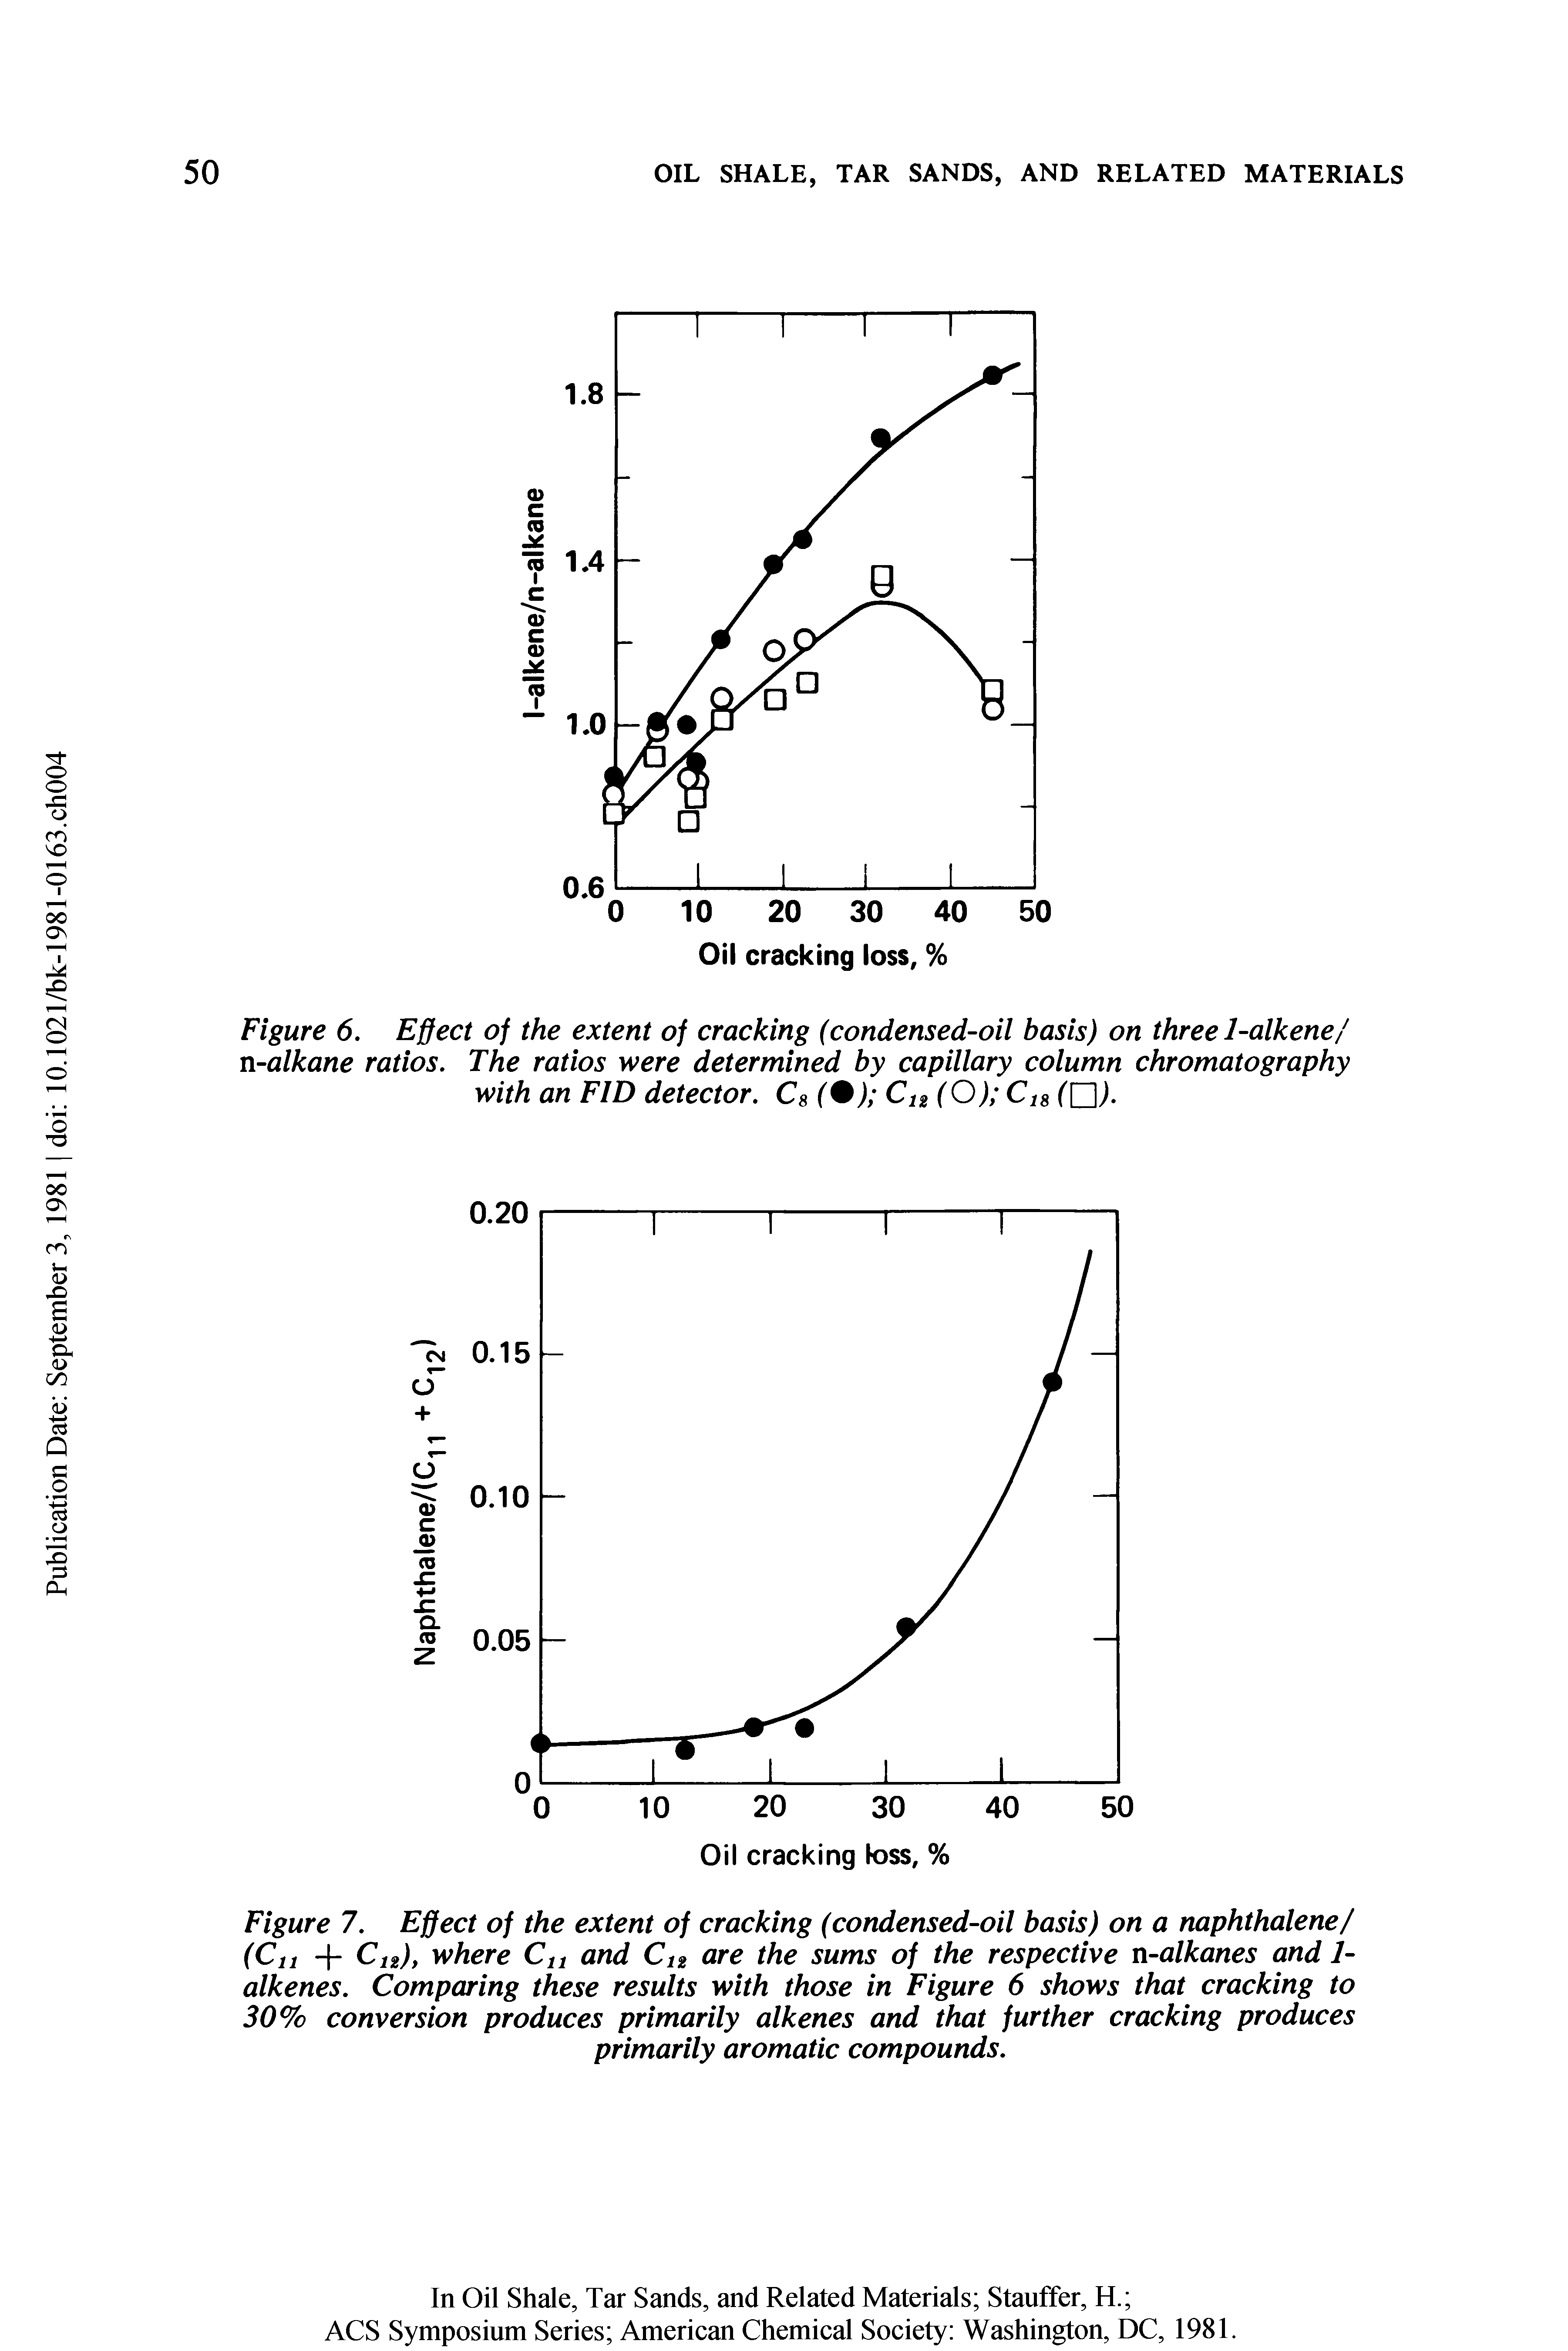 Figure 7. Effect of the extent of cracking (condensed-oil basis) on a naphthalene/ (Cu + C12), where Clt and C12 are the sums of the respective n-alkanes and 1-alkenes. Comparing these results with those in Figure 6 shows that cracking to 30% conversion produces primarily alkenes and that further cracking produces primarily aromatic compounds.